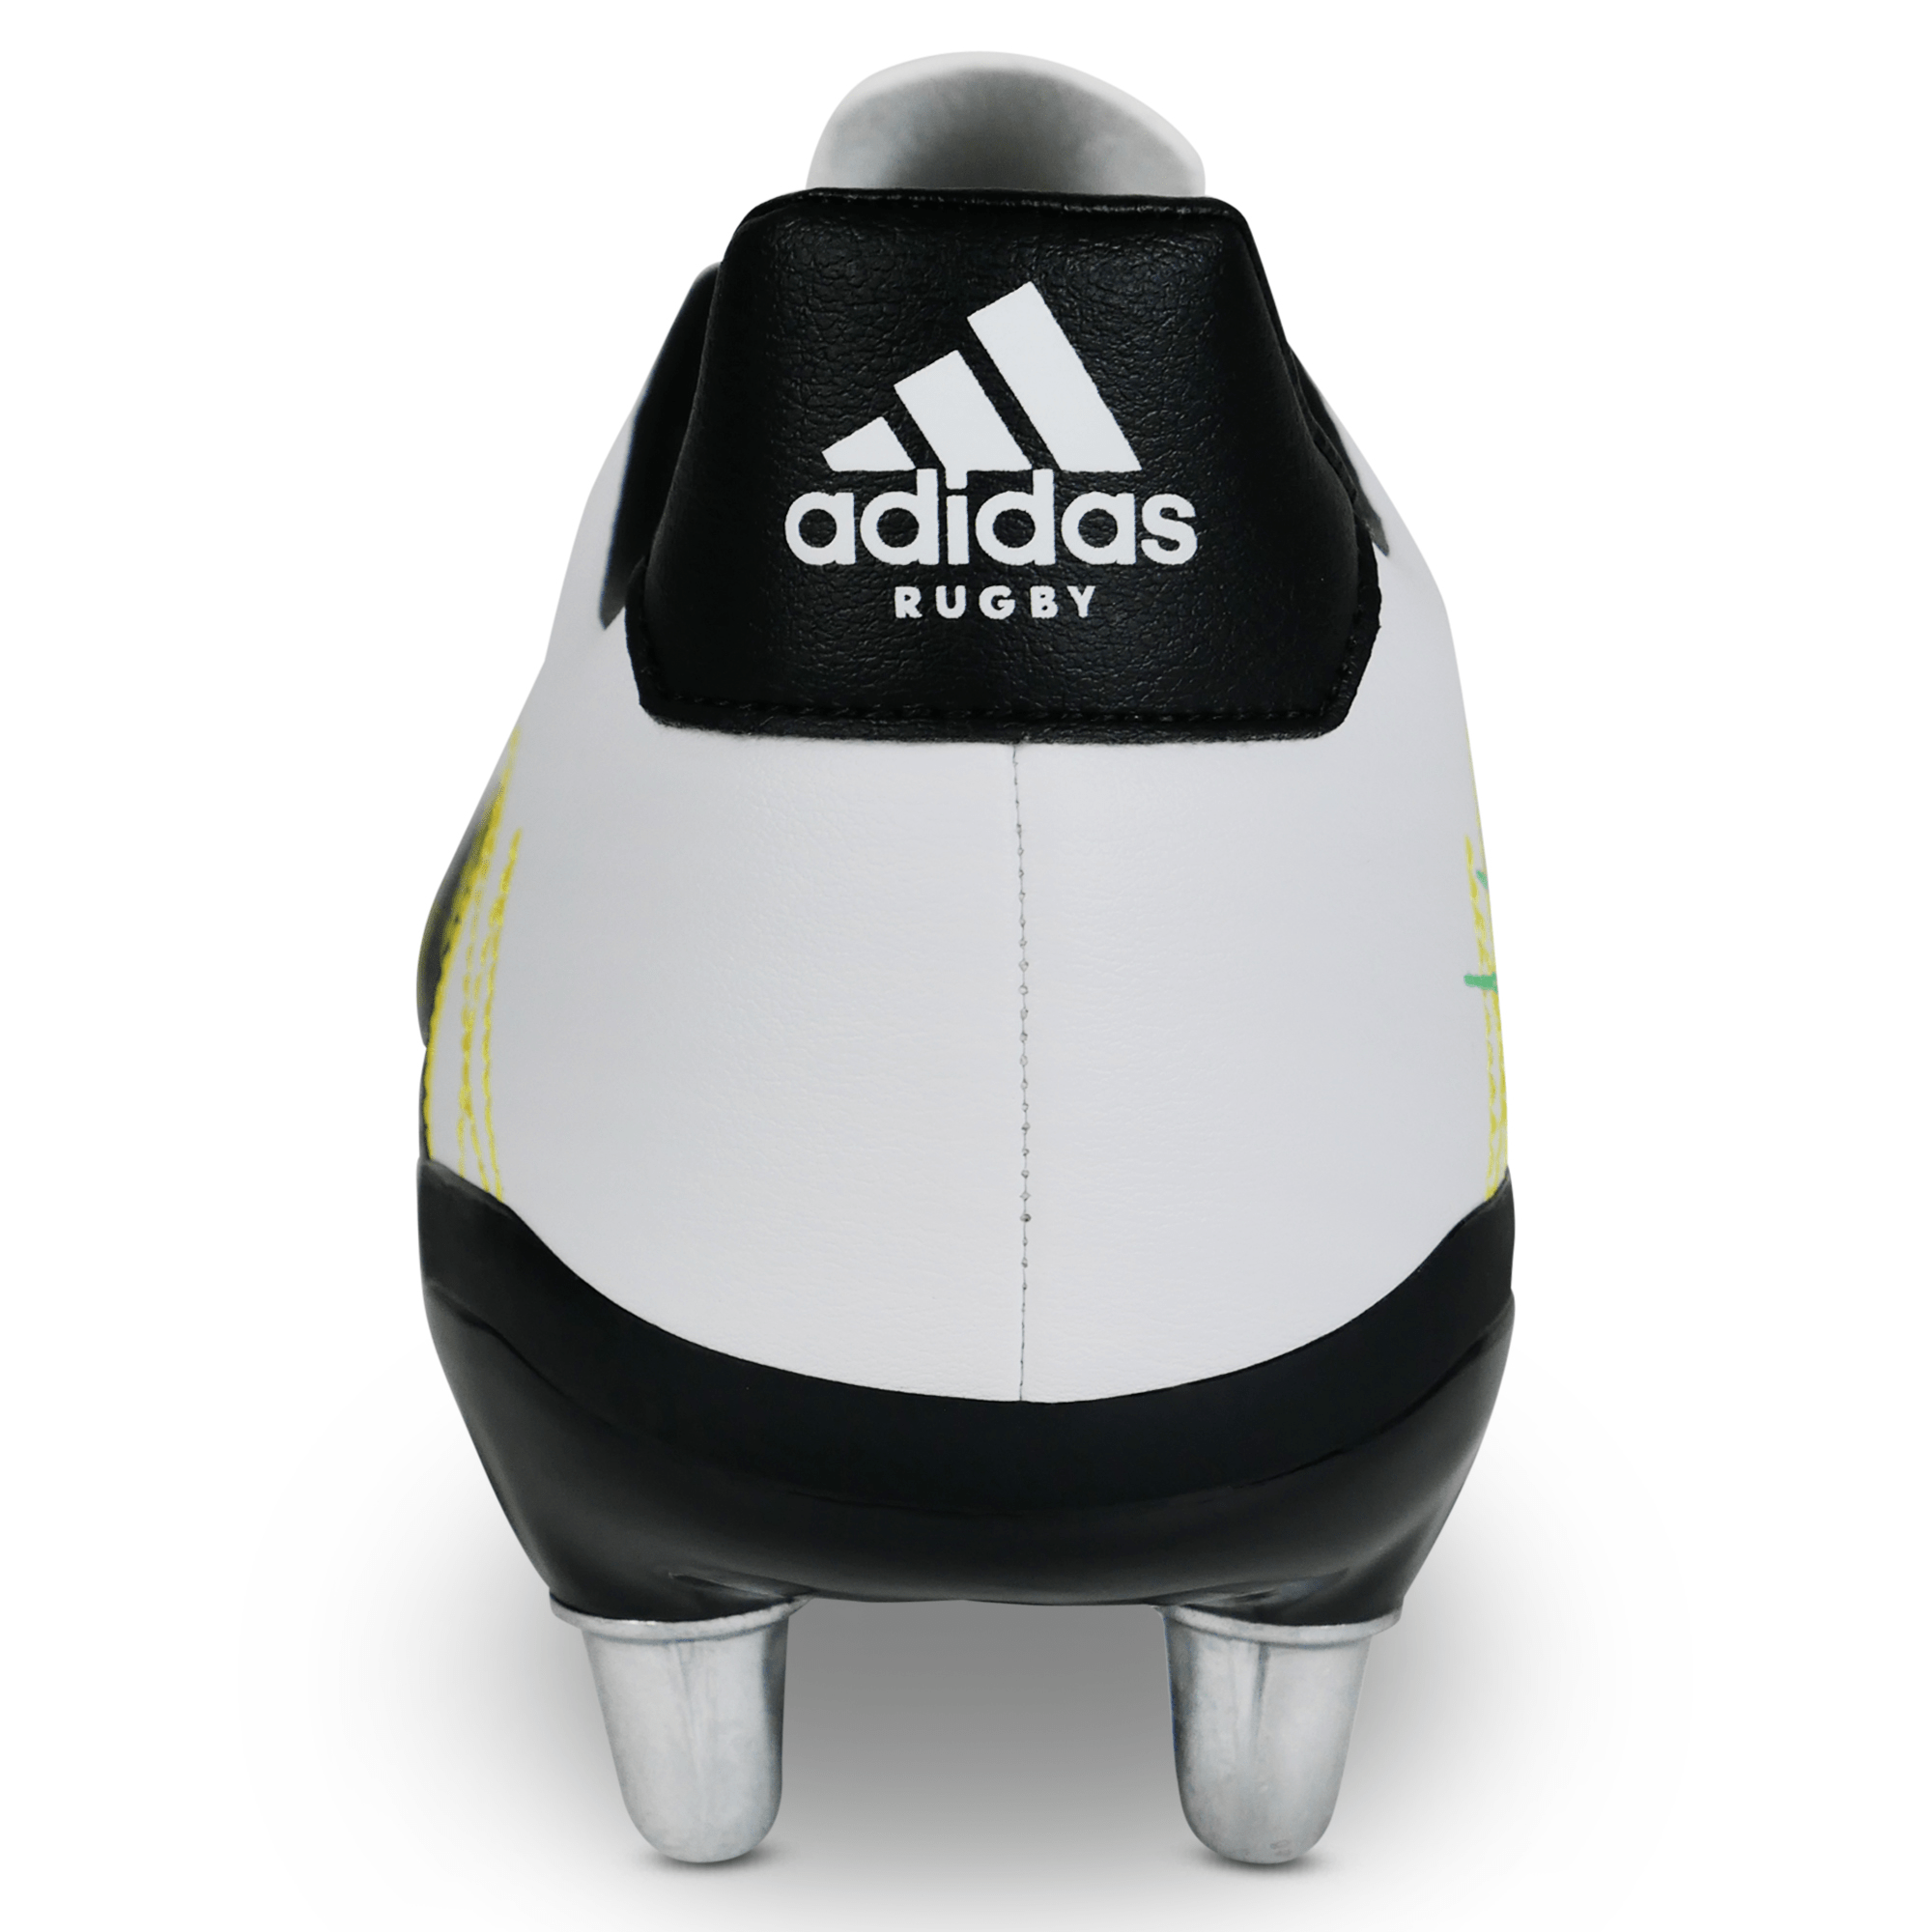 Adidas LUZ65 Performance Kakari Rugby Cleat - Soft Ground Boot